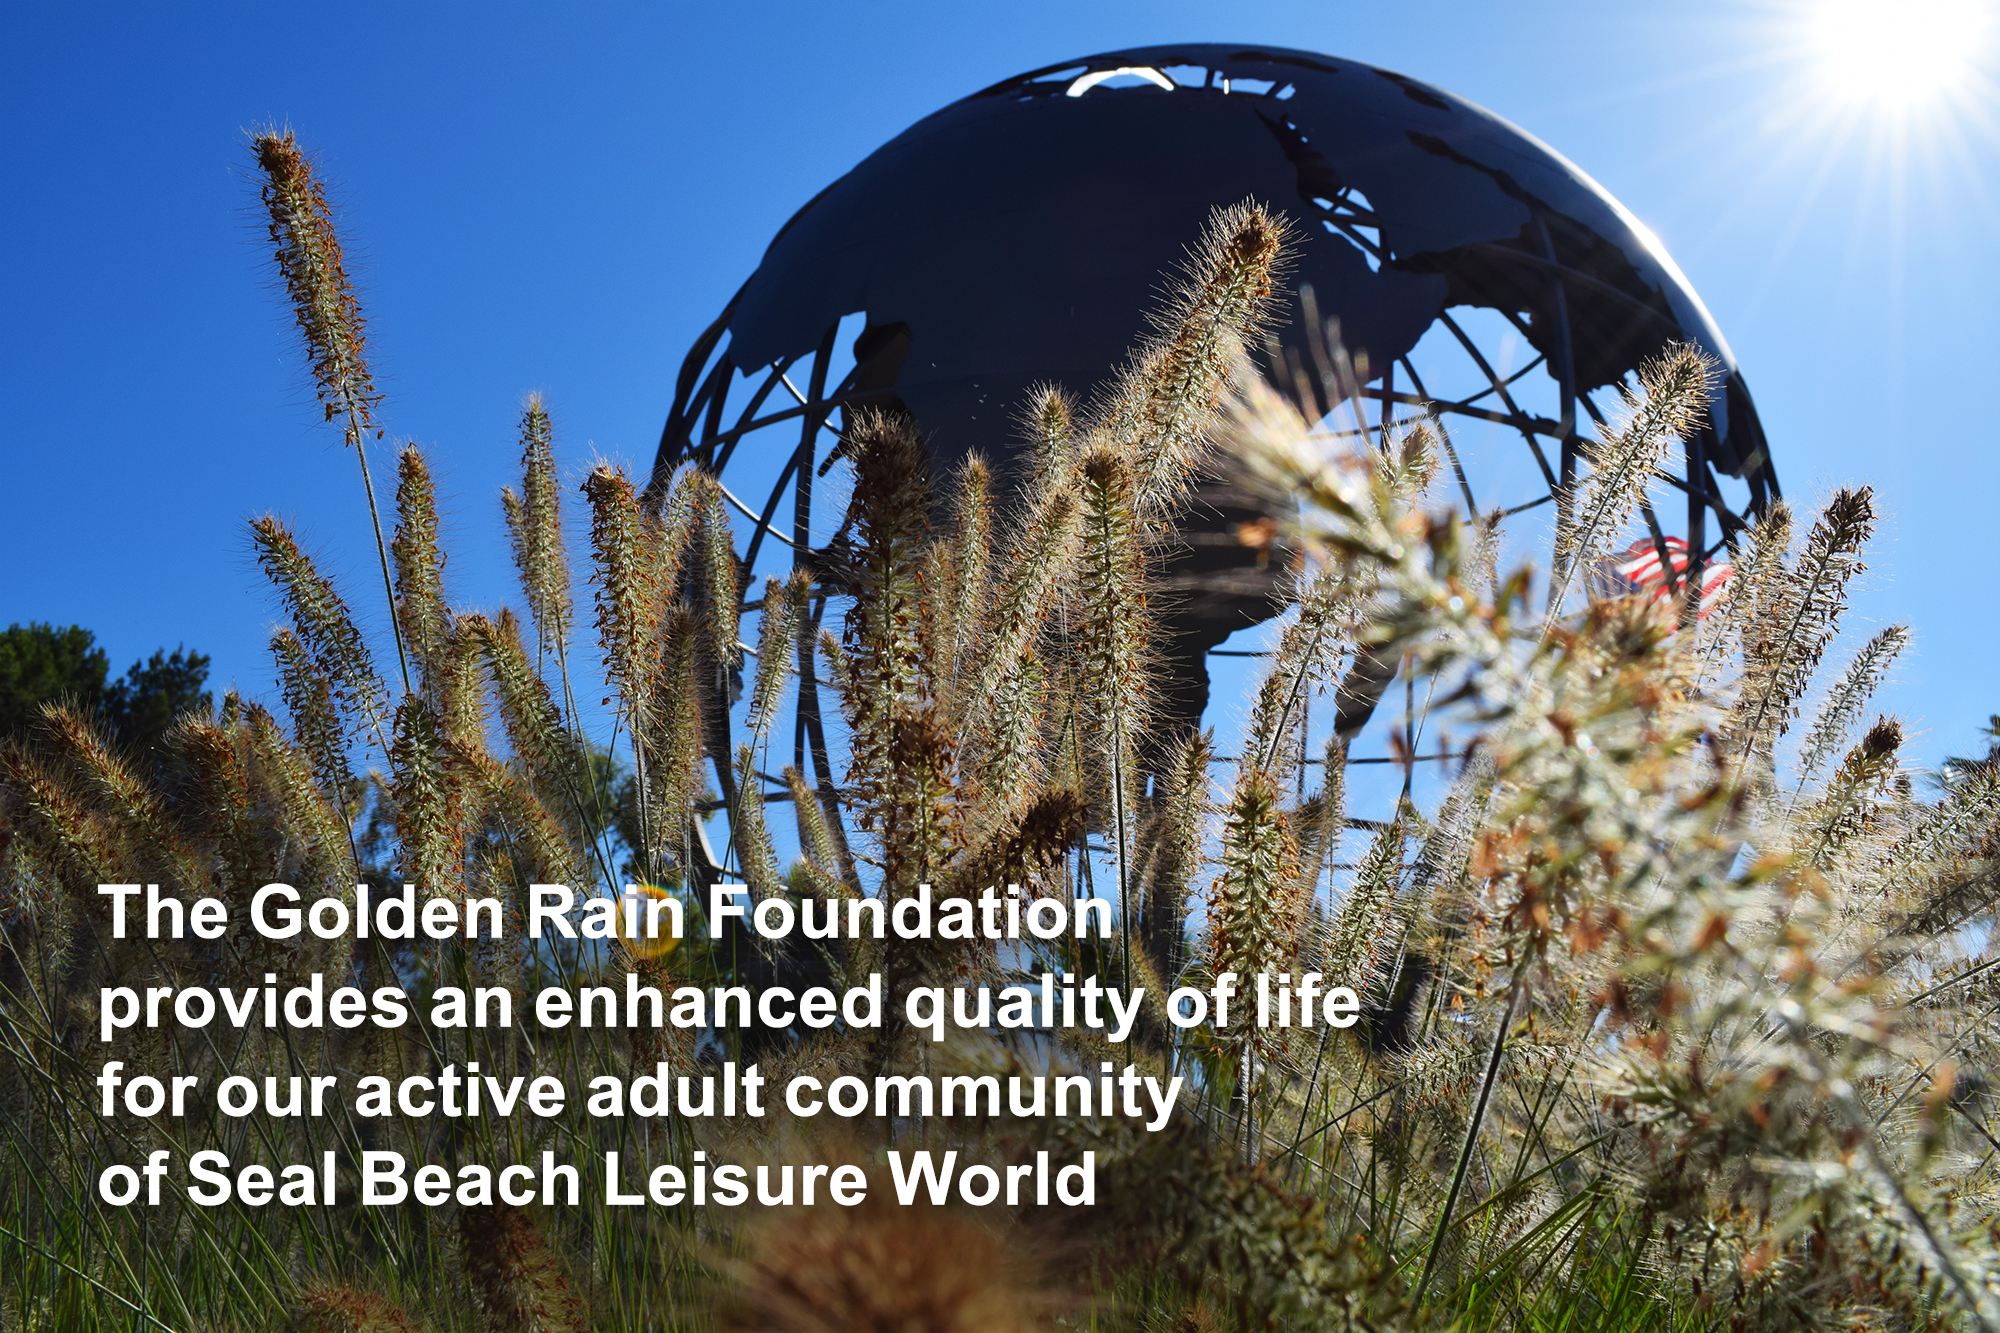 Golden Rain Foundation Leisure World Seal Beach The purpose of our website is to improve communications and to allow shareholders to easily find and access information. golden rain foundation leisure world